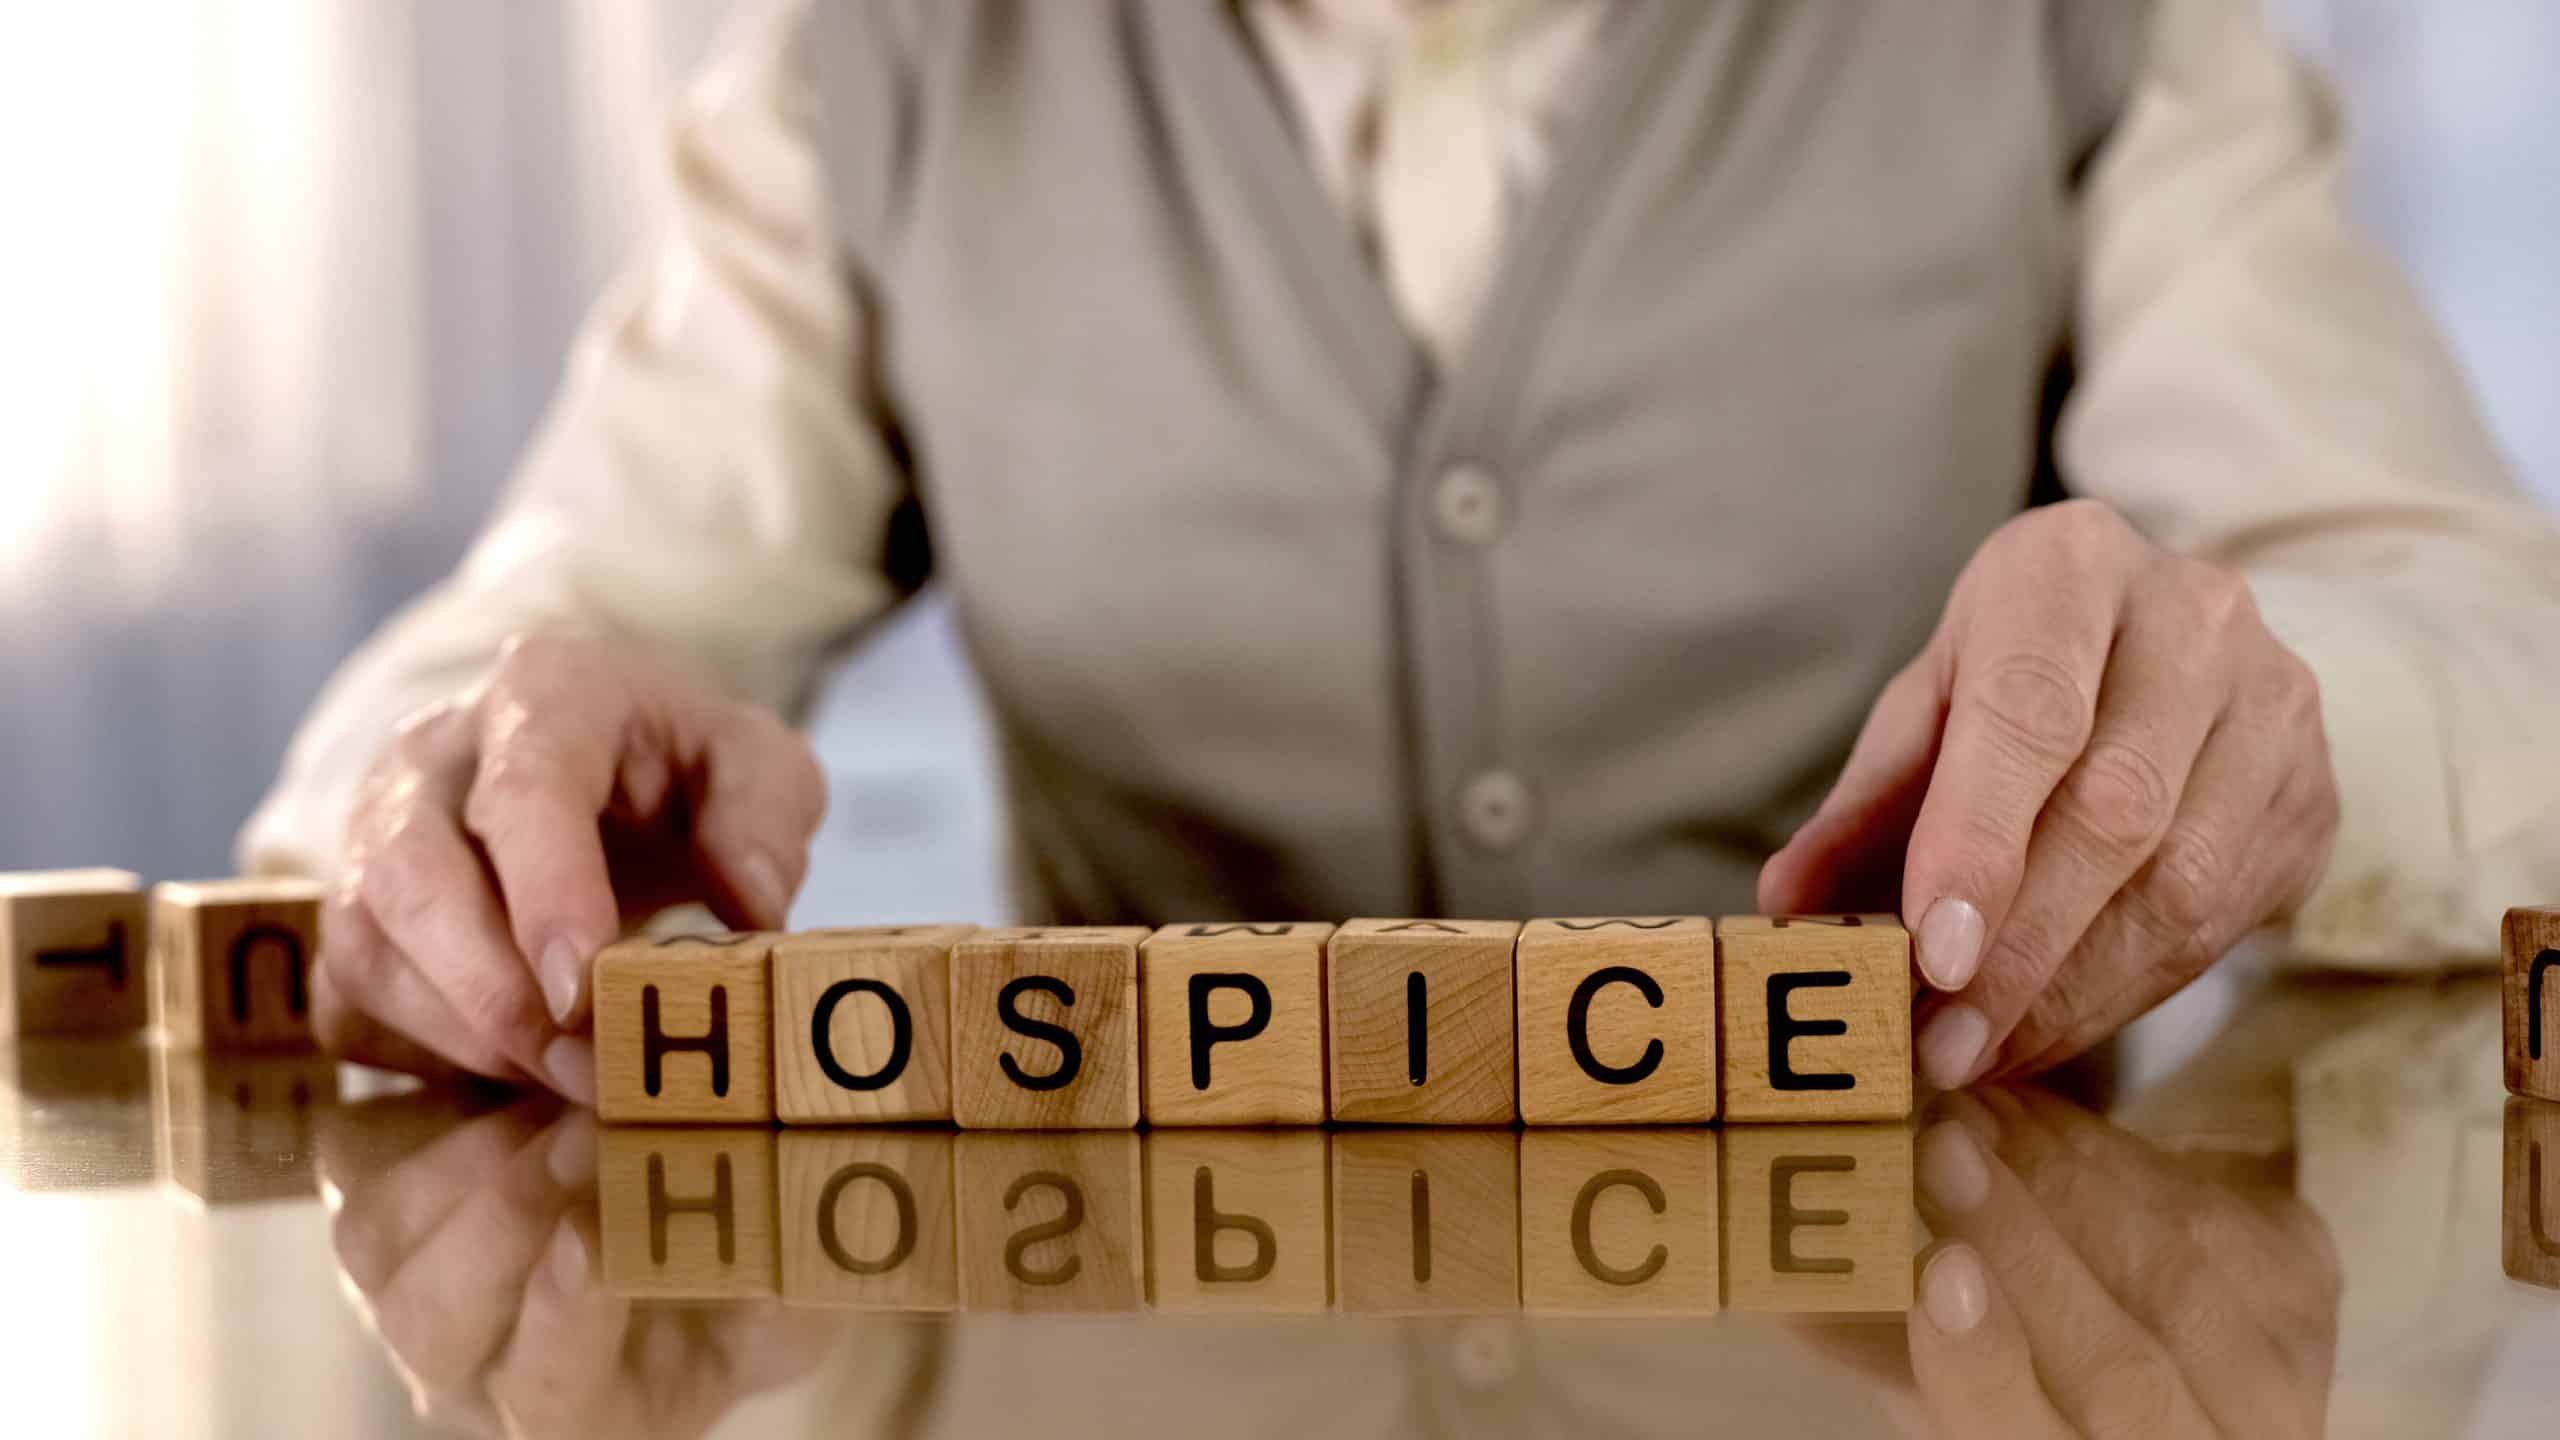 Is Hospice Only for the Dying?